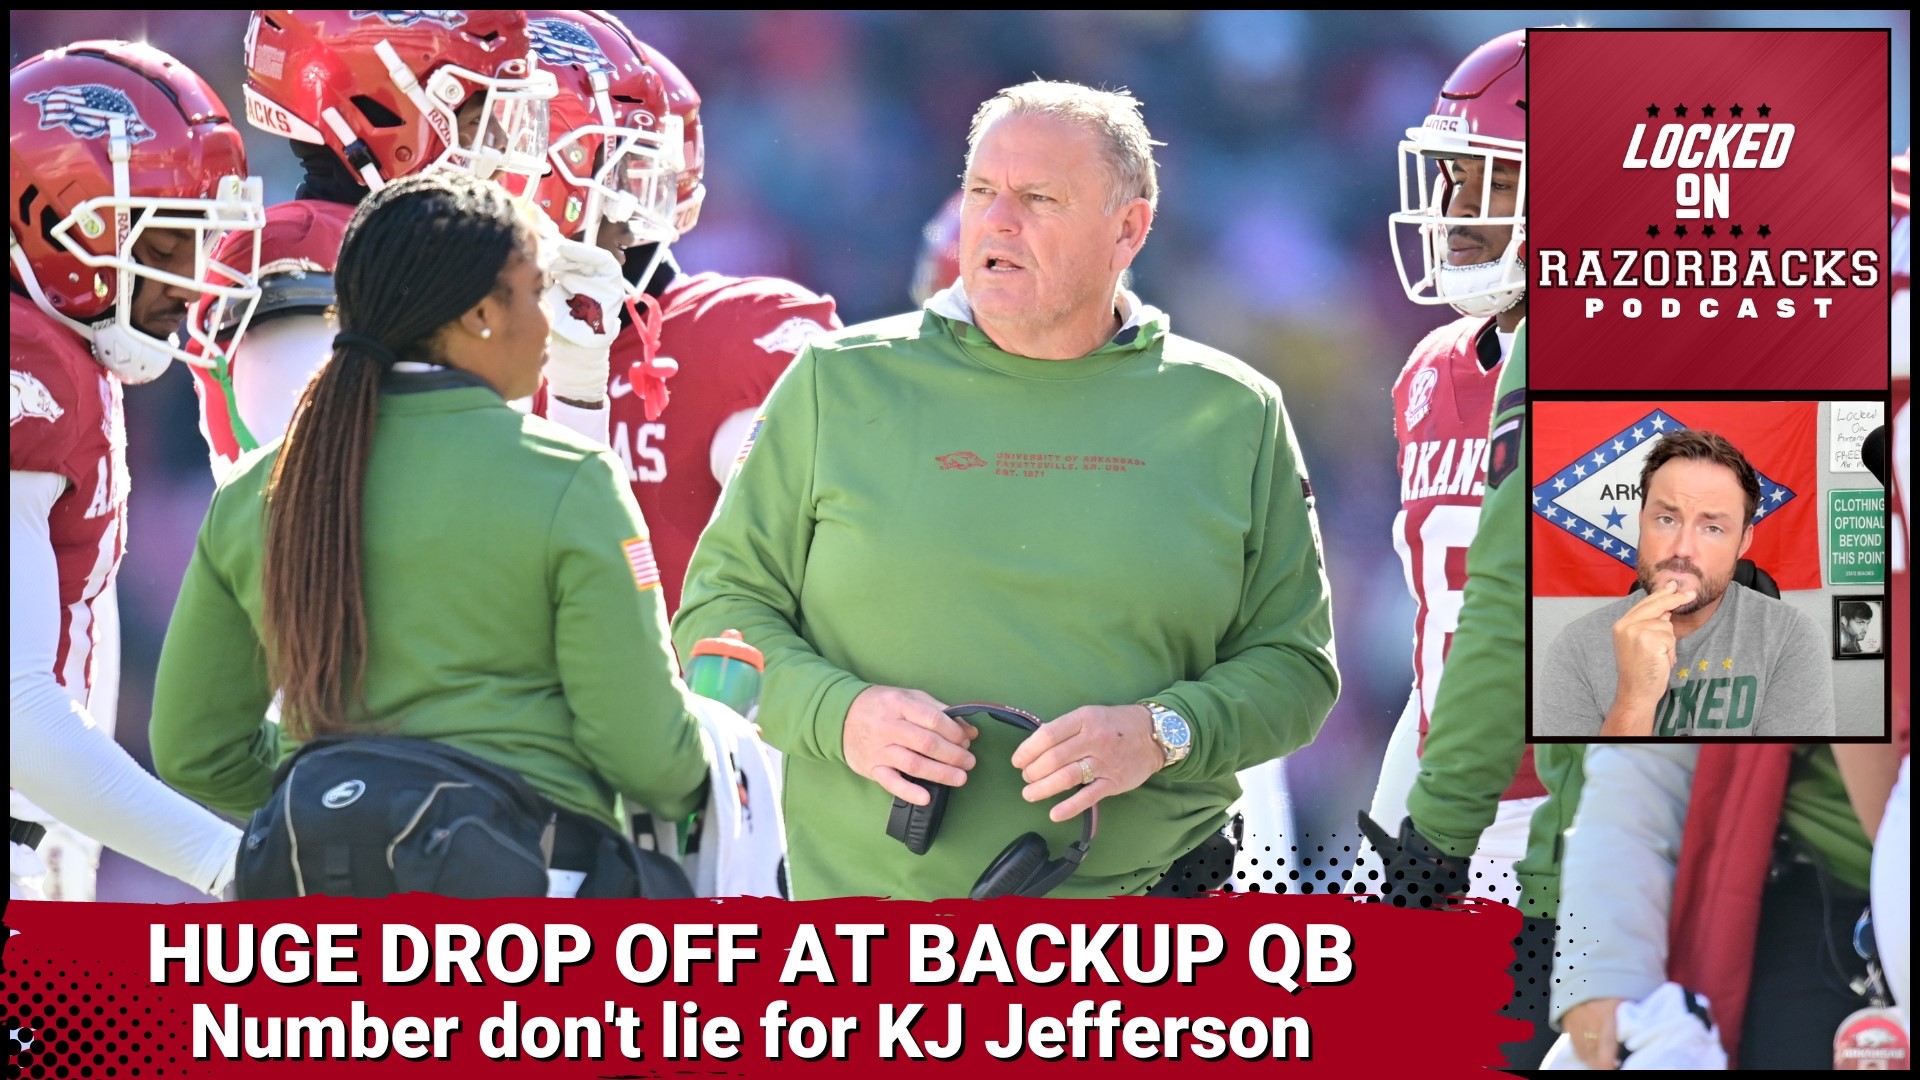 John Nabors discusses the different reasons as to why there is such a big drop off from KJ Jefferson to the back up QBs for the Razorbacks.